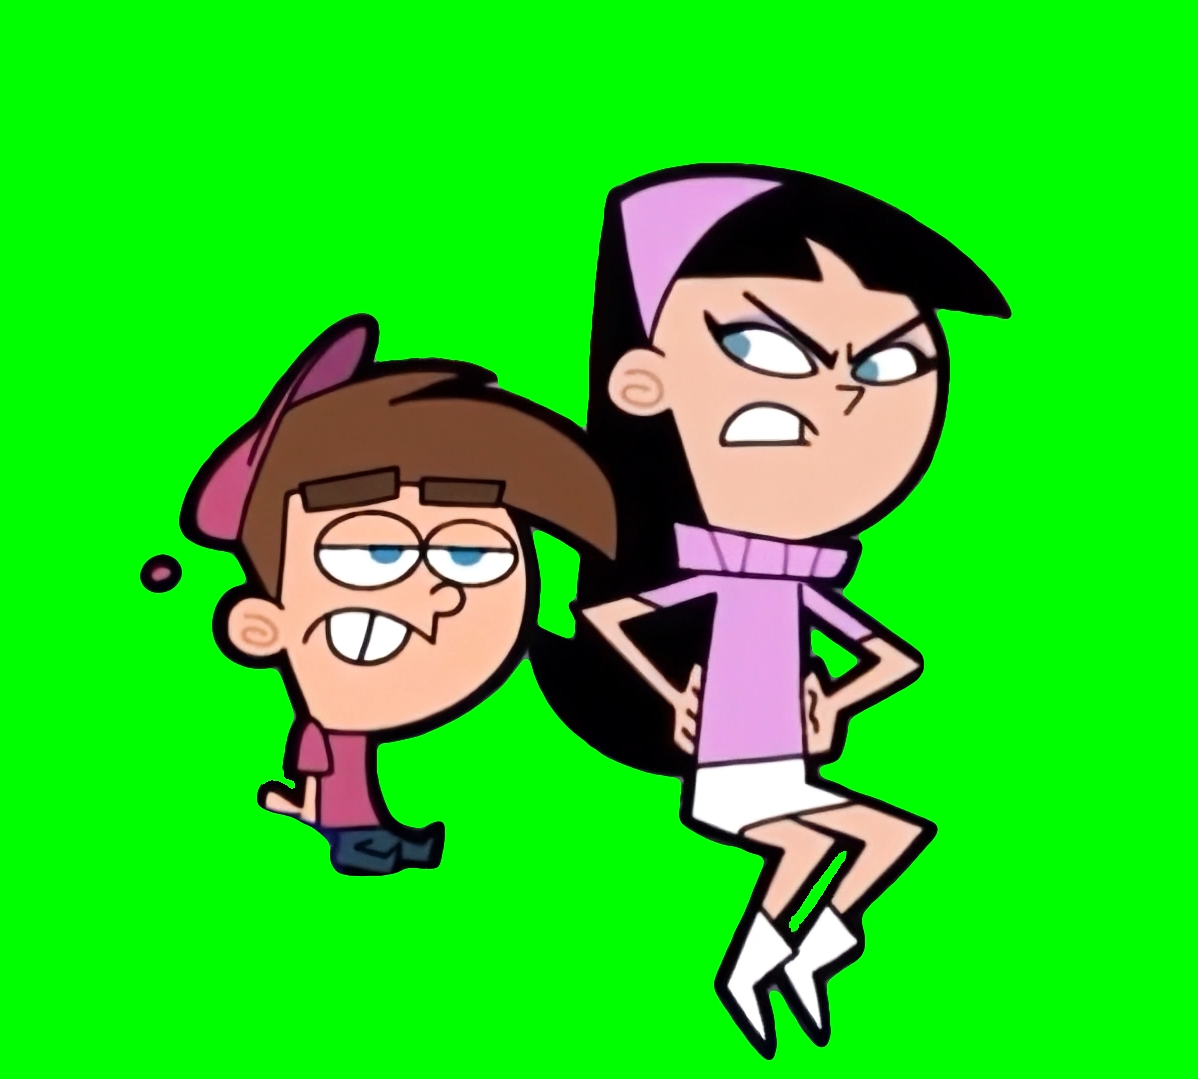 Timmy Turner ignoring Trixie meme - The Fairly Odd Parents (Green Screen)